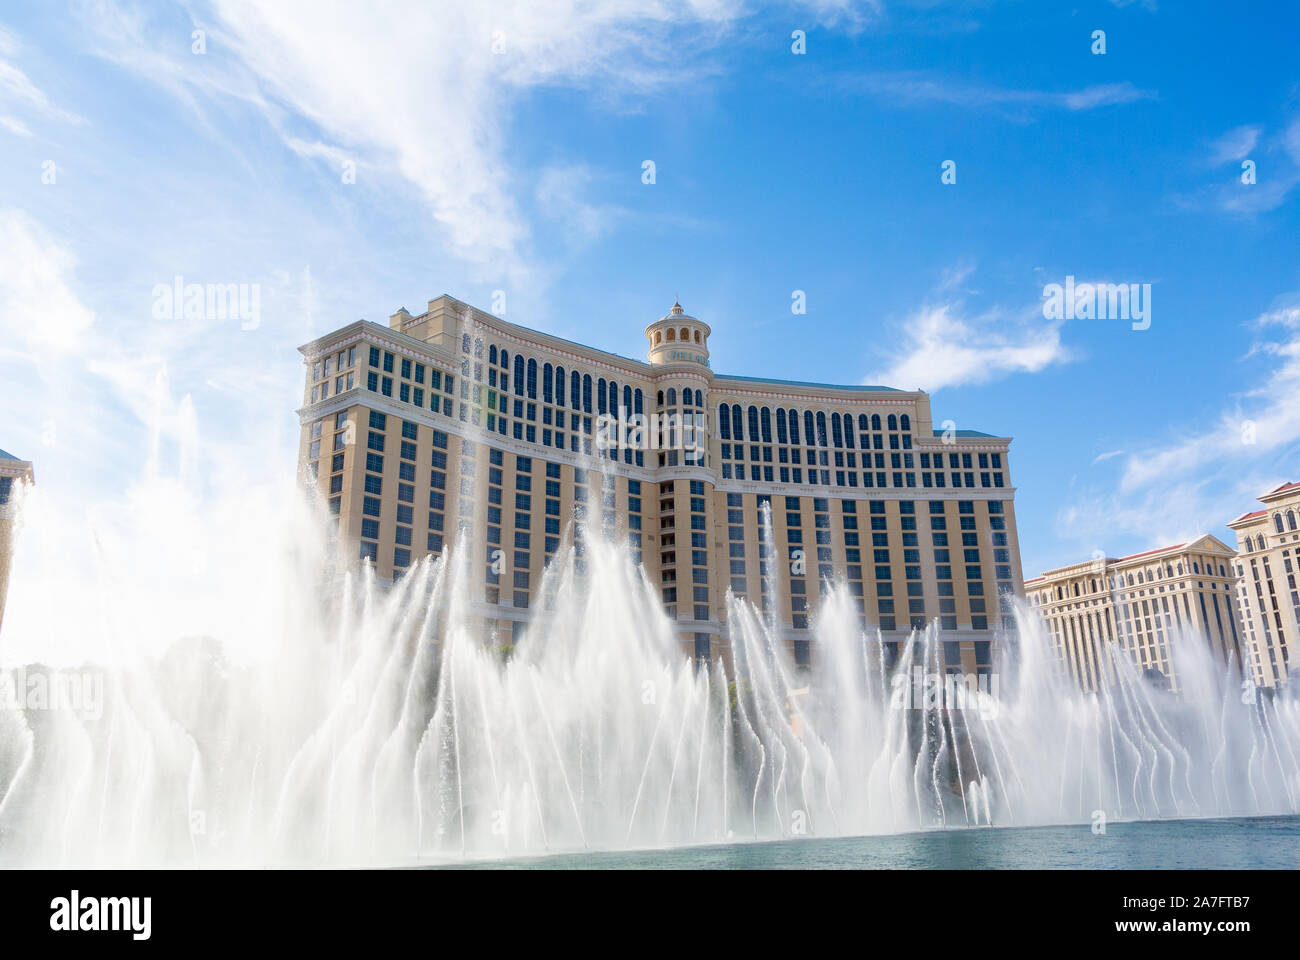 Bellagio hotel with spectacle of fountains, las vegas, nevada, united states of america Stock Photo